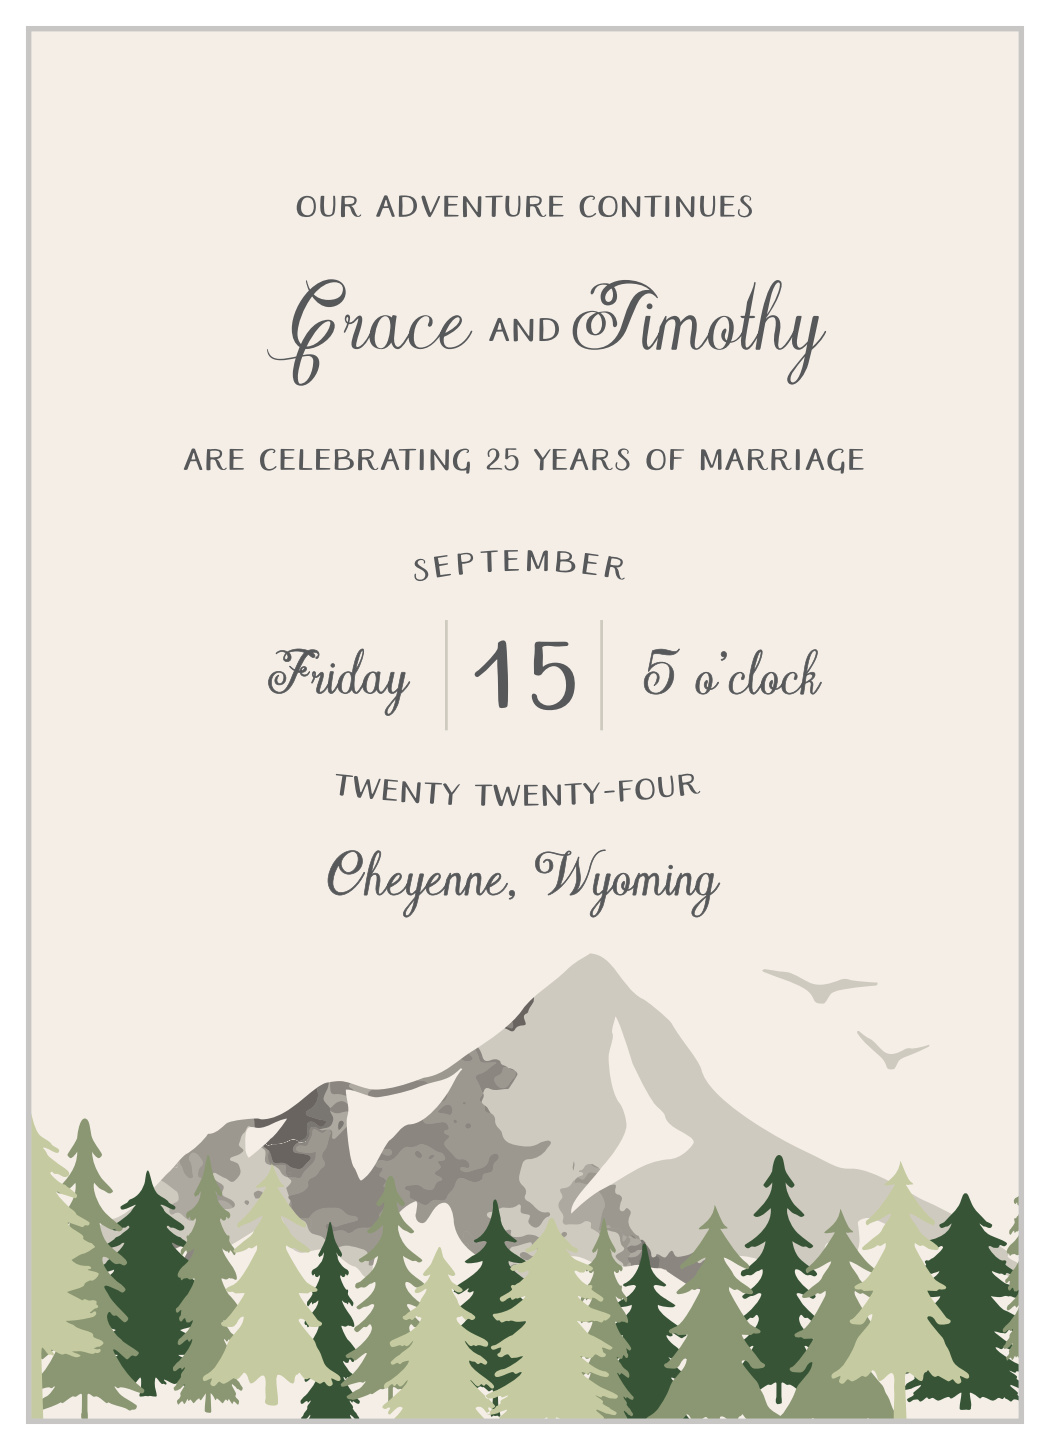 Misty Mountains Vow Renewal Invitations